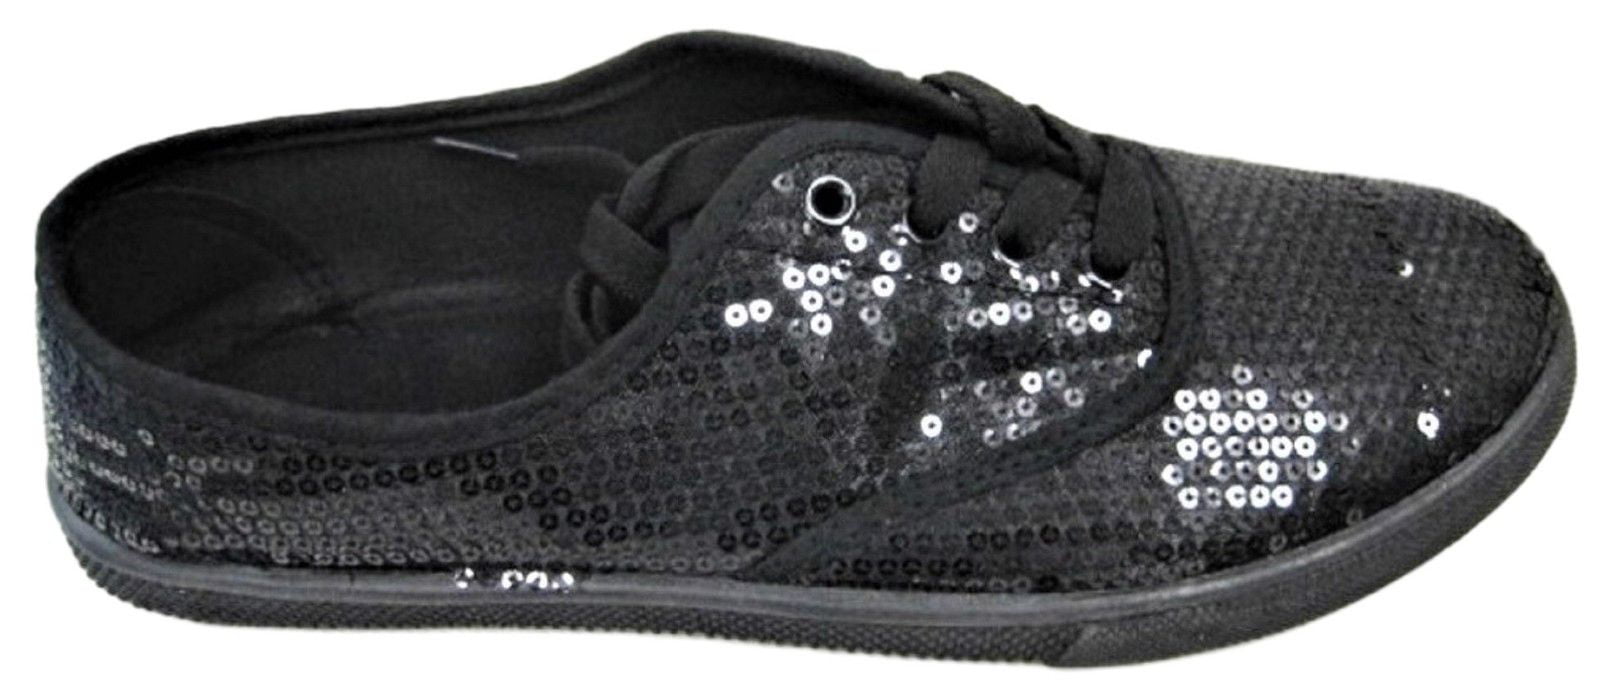 sparkly tennis shoes womens